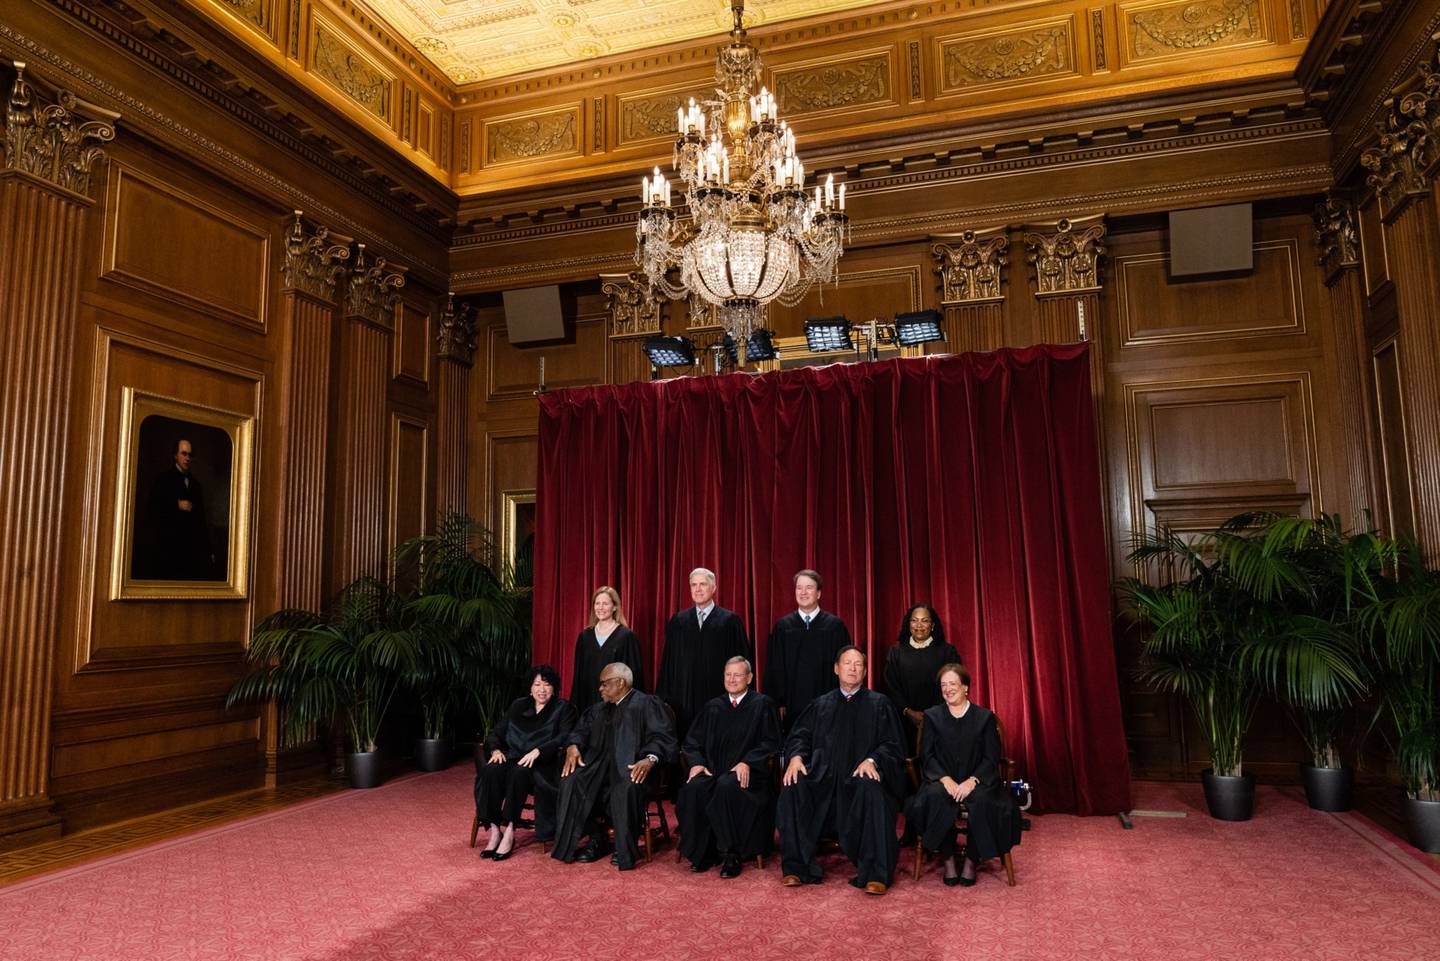 Hearing arguments in Washington on Monday, the justices showed deep divides -- largely if not completely along ideological lines -- as they heard challenges to affirmative action programs at the University of North Carolina and Harvard College.